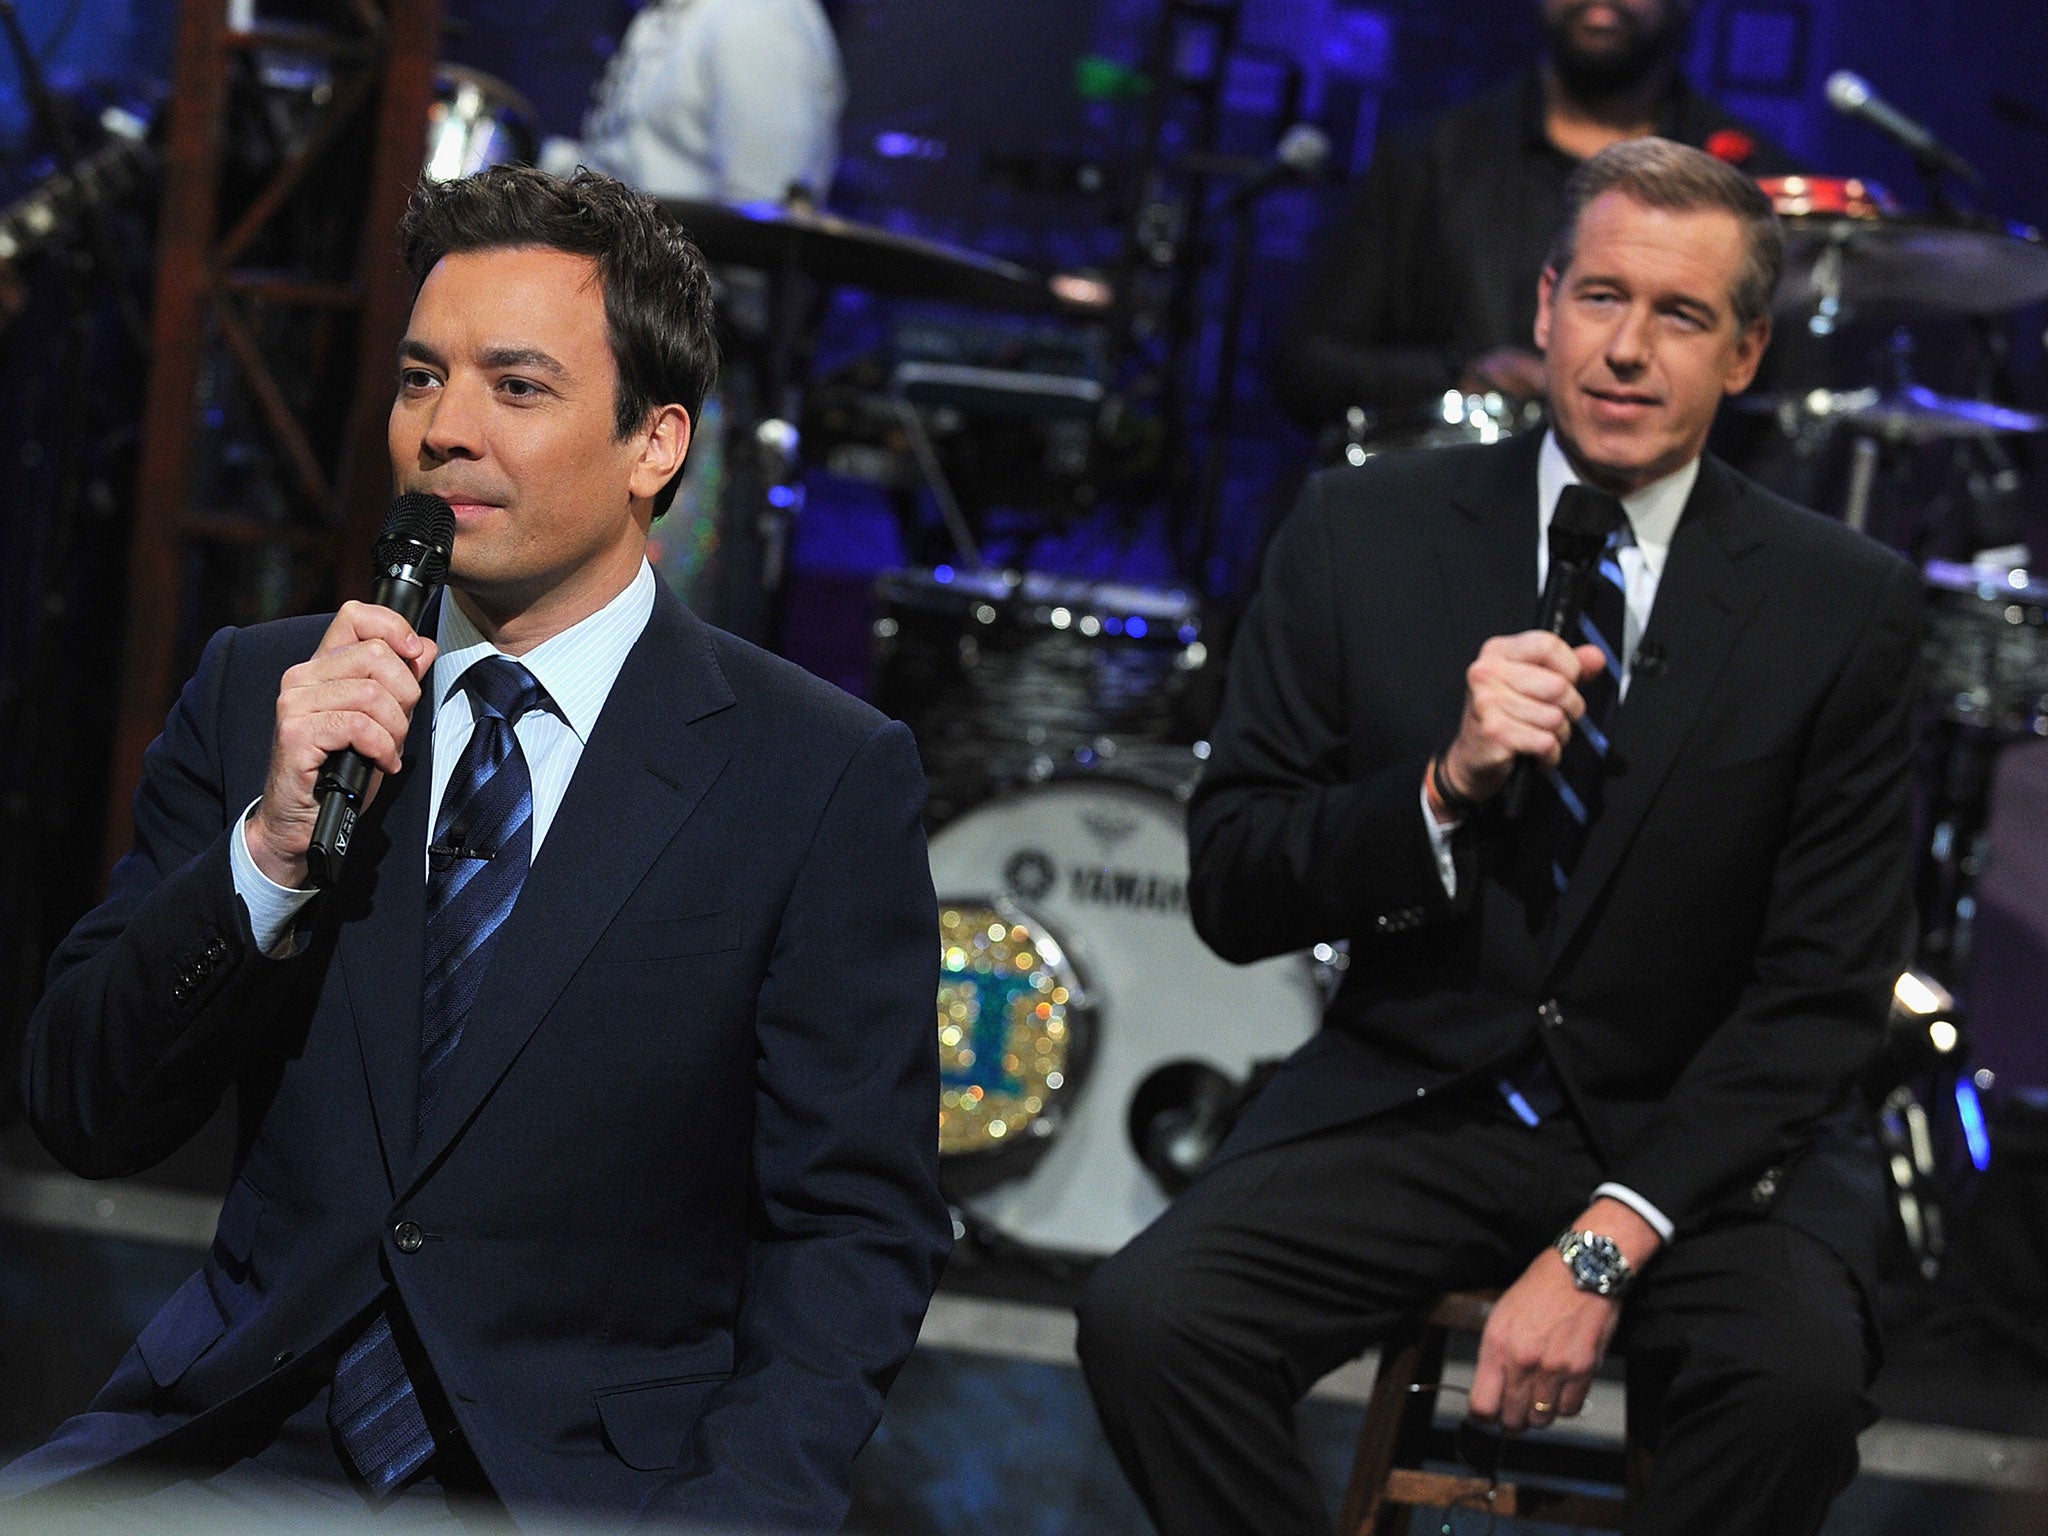 Brian Williams (L) and Jimmy Fallon appear on the Late Night with Jimmy Fallon at the Rockefeller Center on 2 March, 2011, in New York City